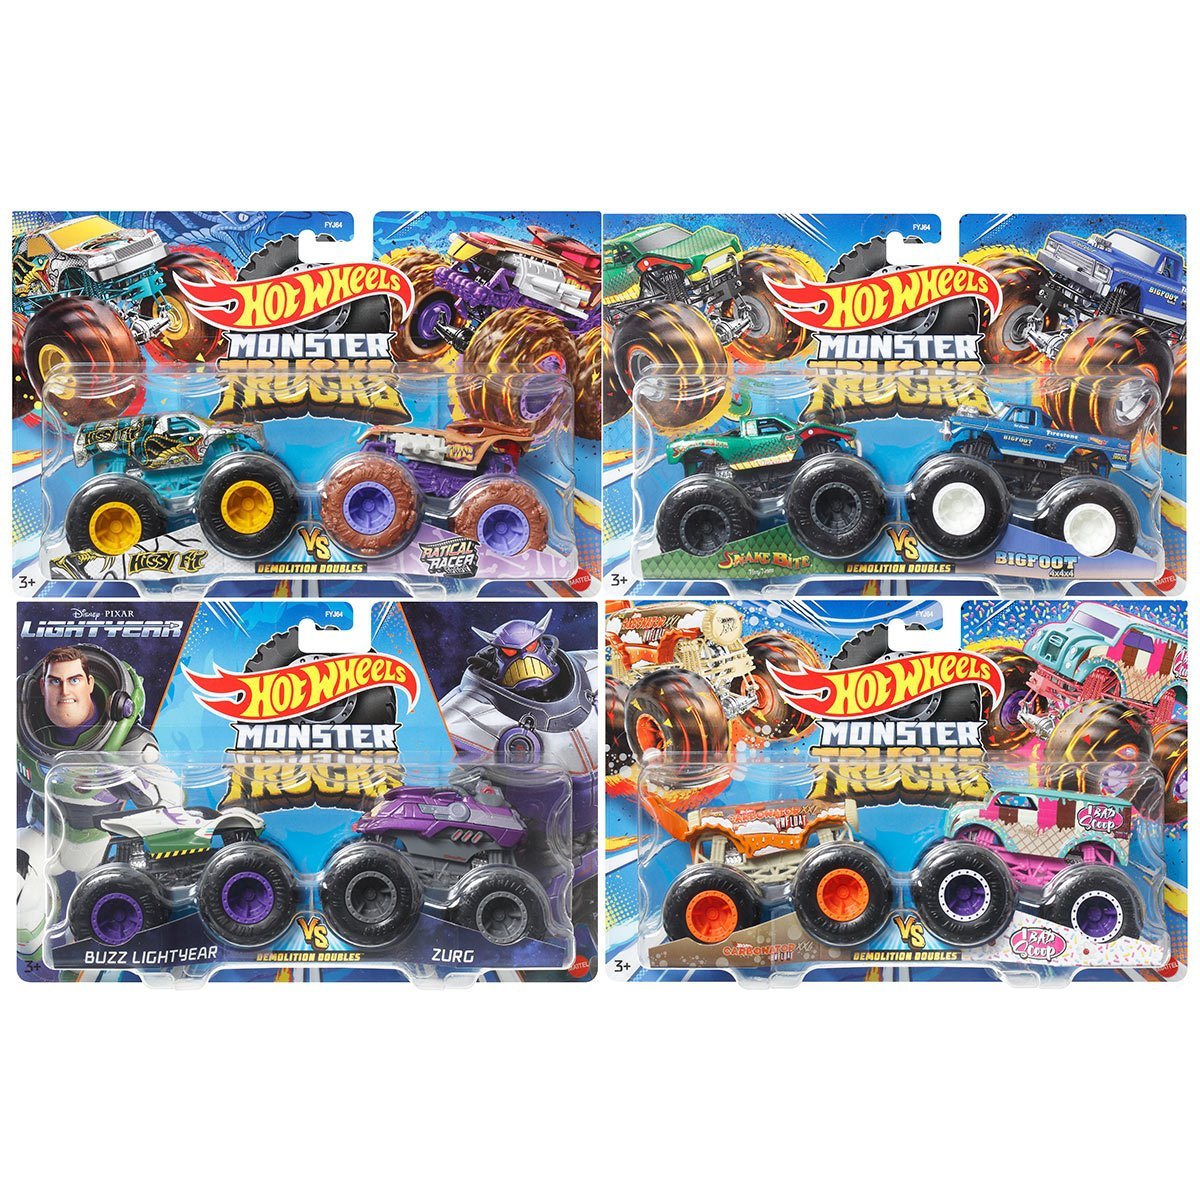 Hot Wheels Monster Trucks Demolition Doubles - 2 Pack - Assorted Style